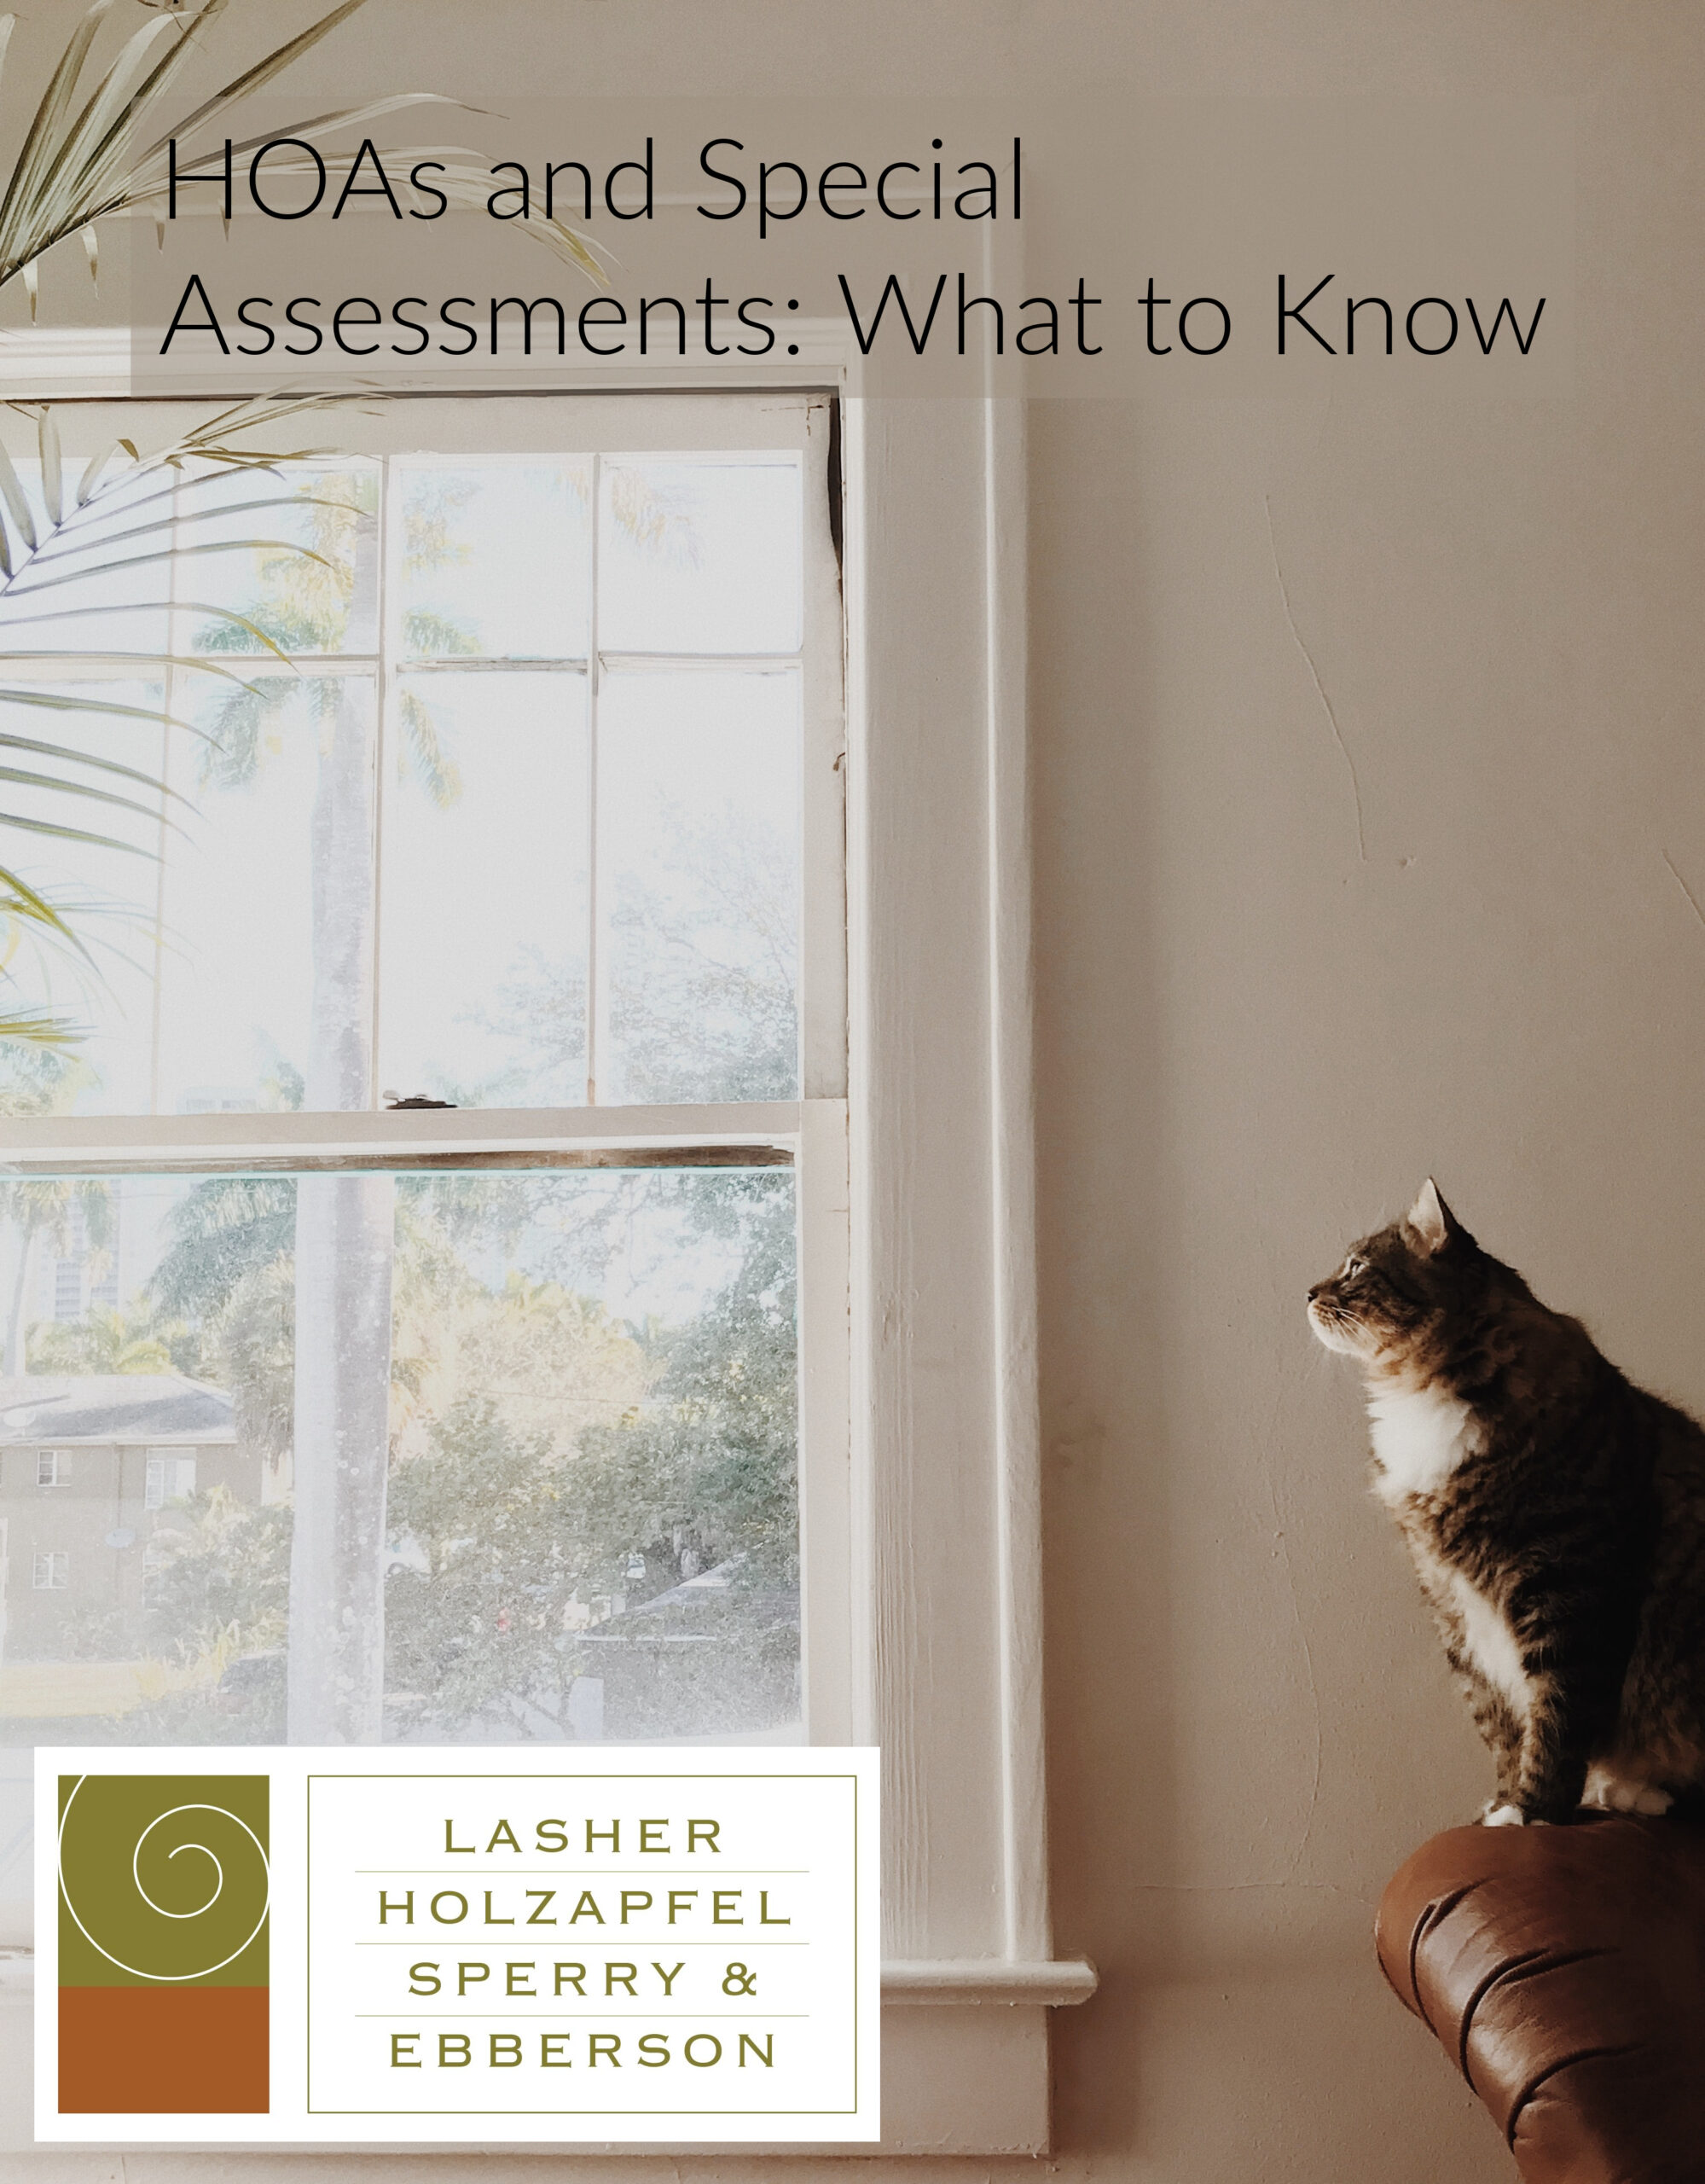 HOAs and Special Assessments: What to Know